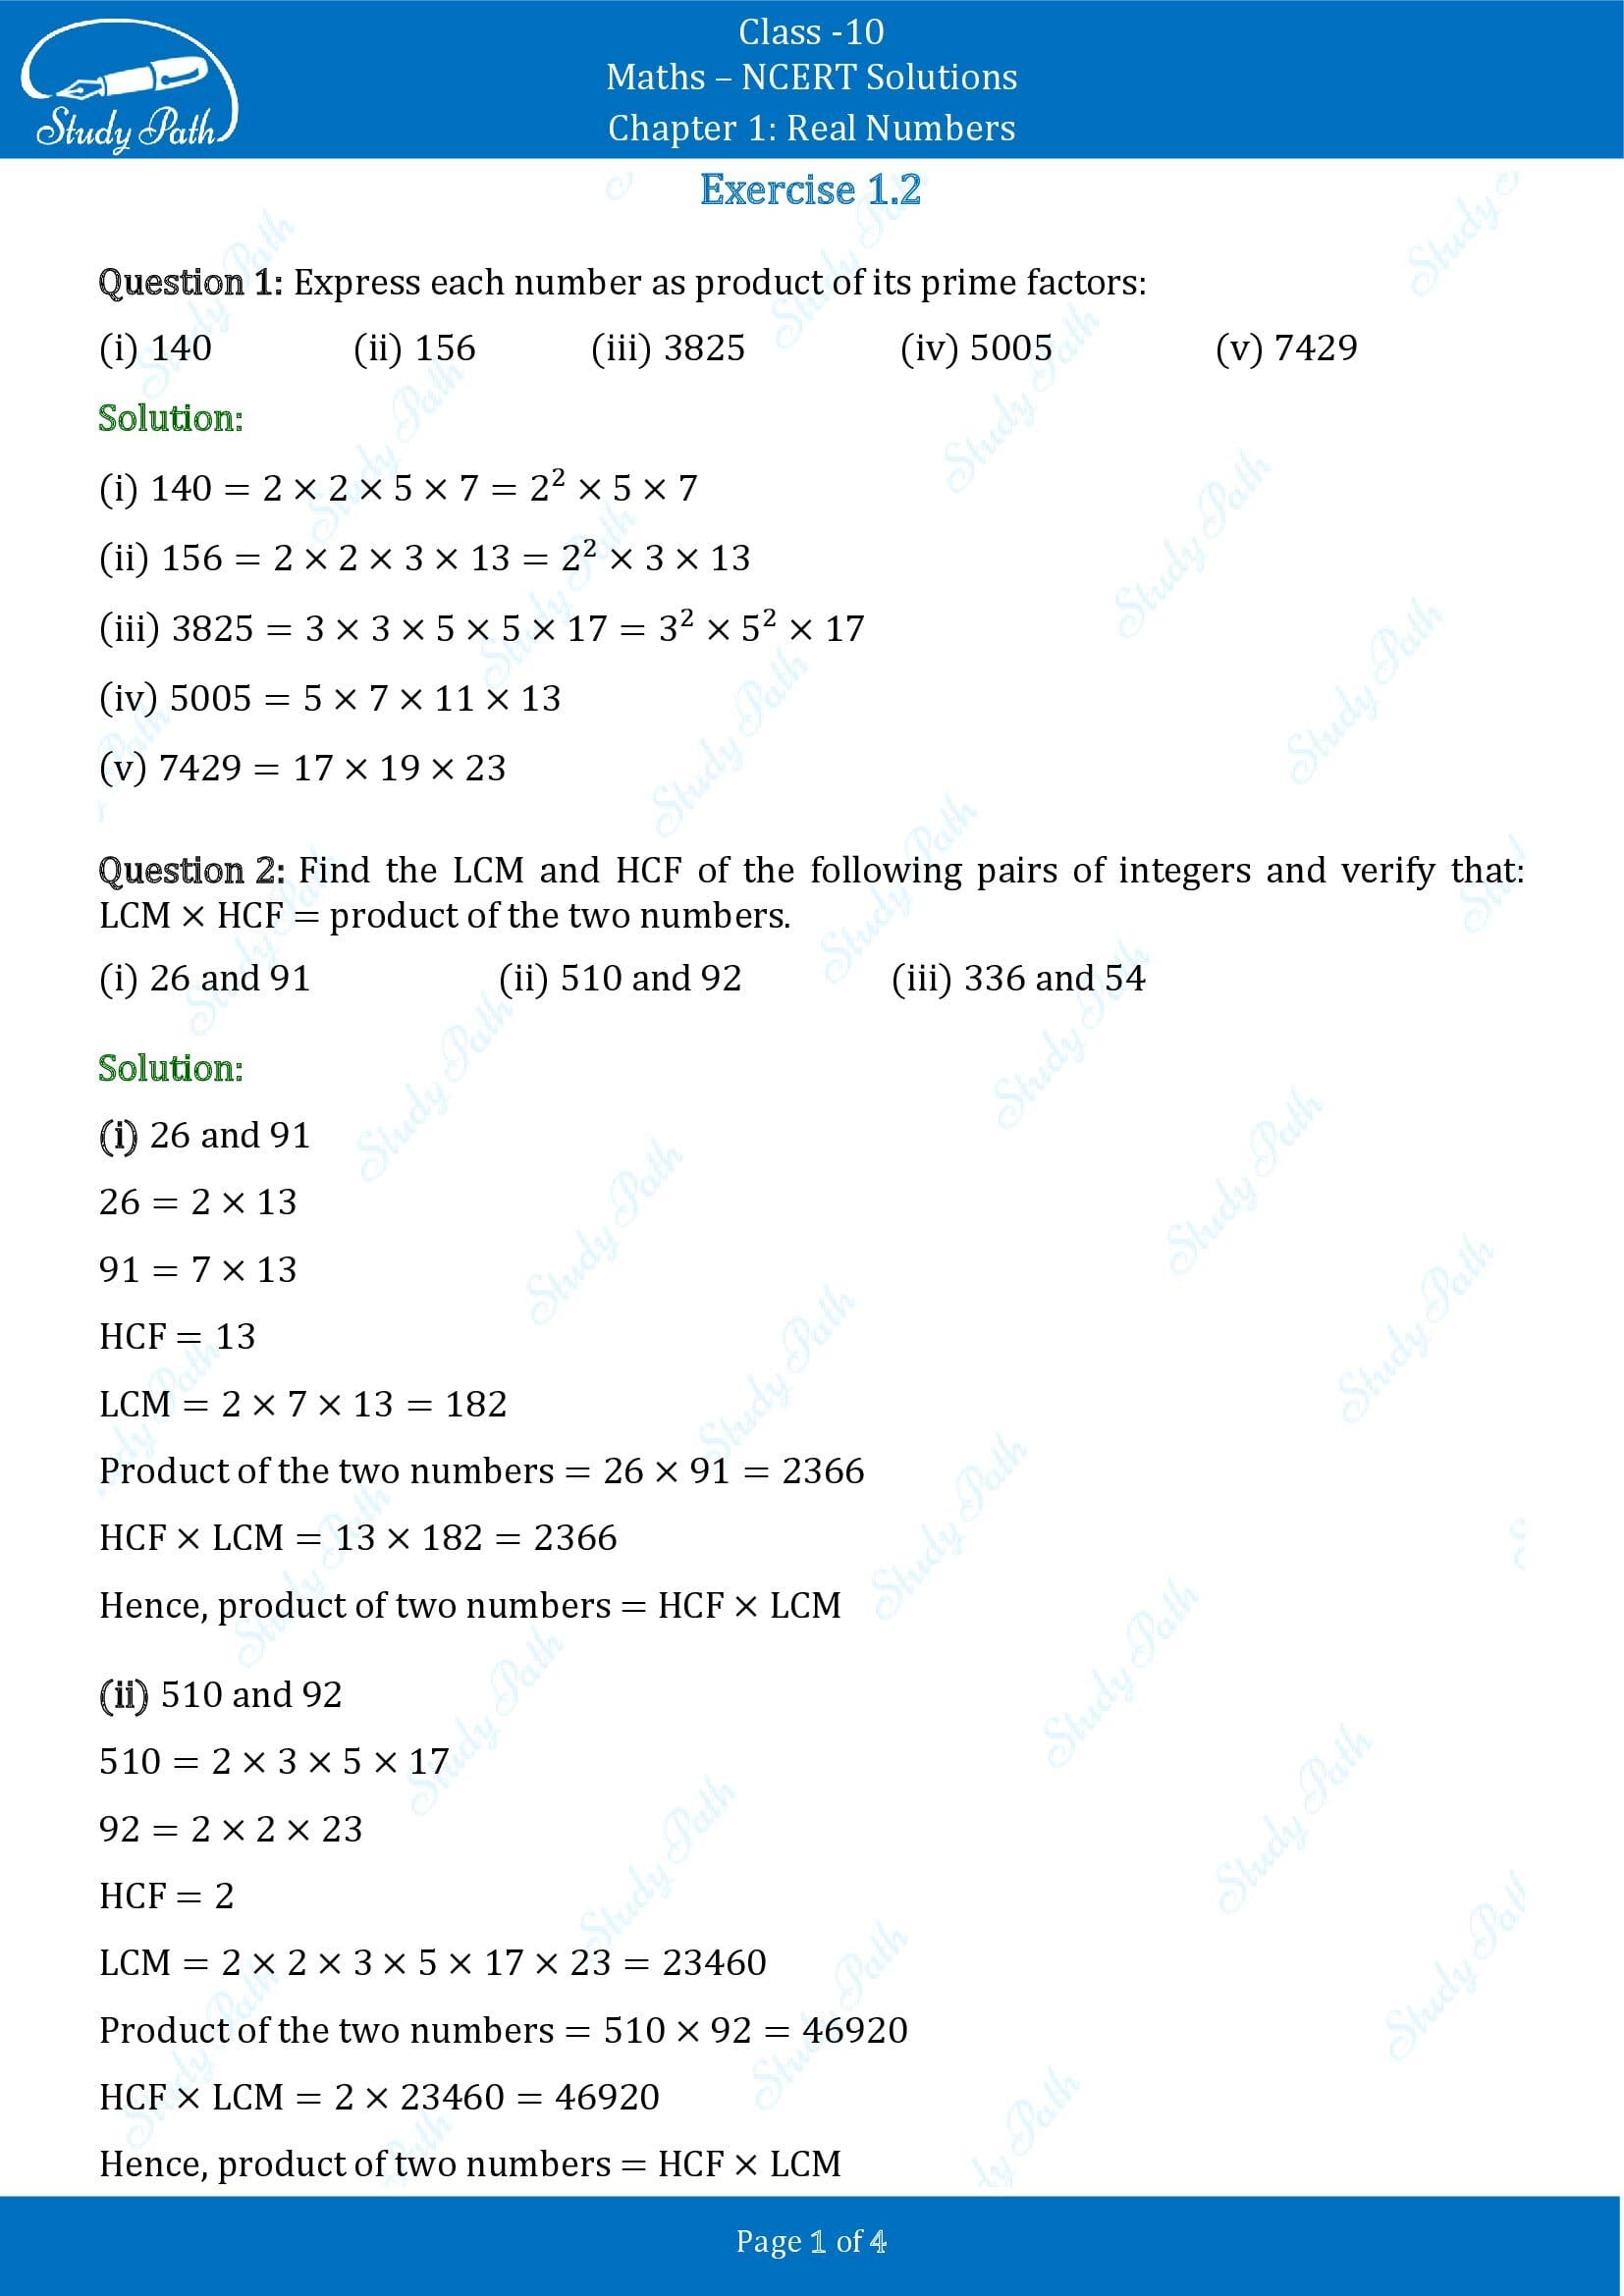 ncert-solutions-for-class-10-maths-exercise-1-2-chapter-1-real-numbers-study-path